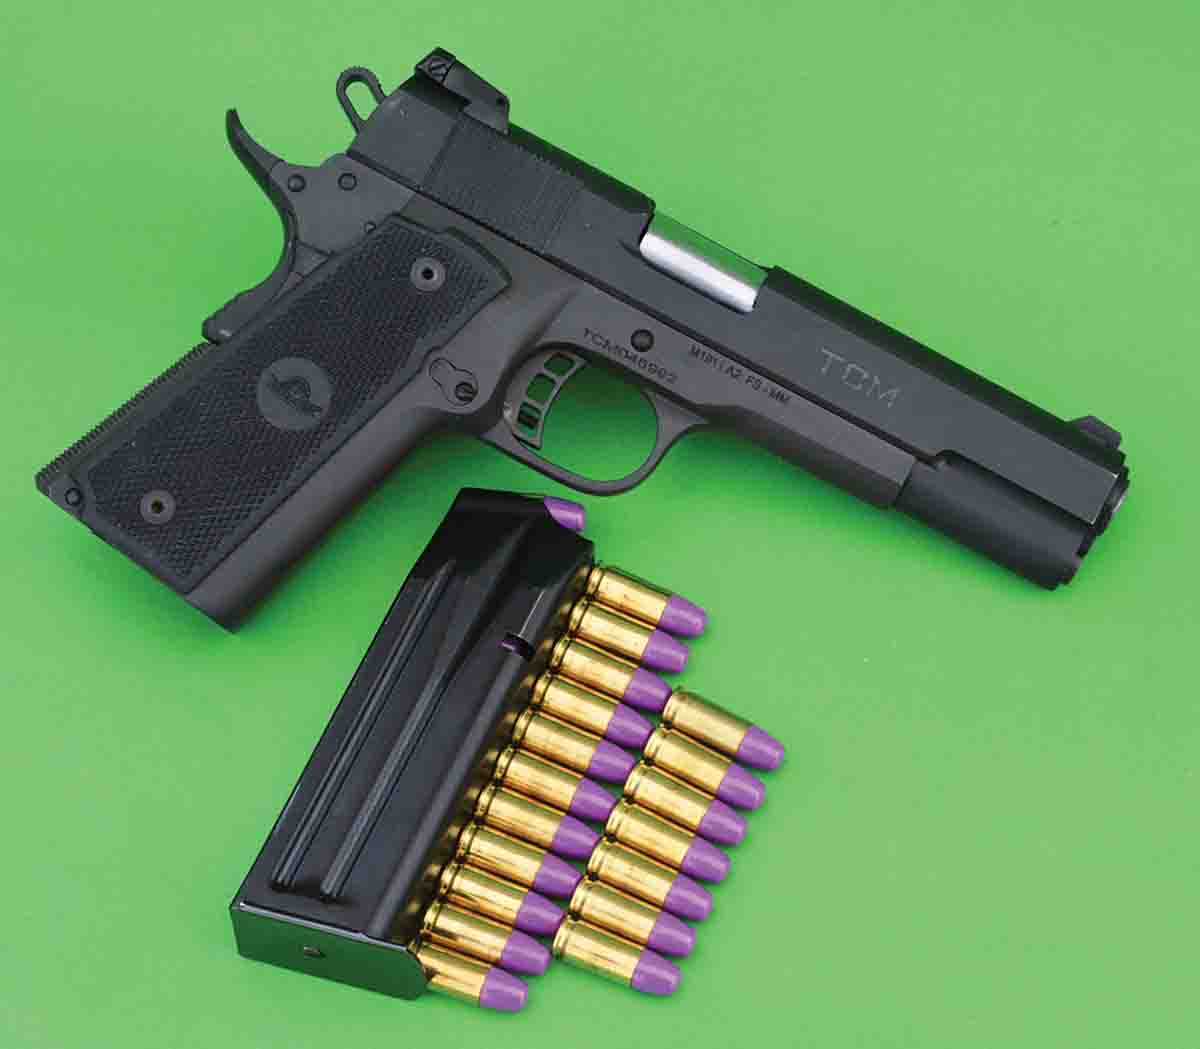 The Rock Island M1911 A2 features a 17+1 round capacity.